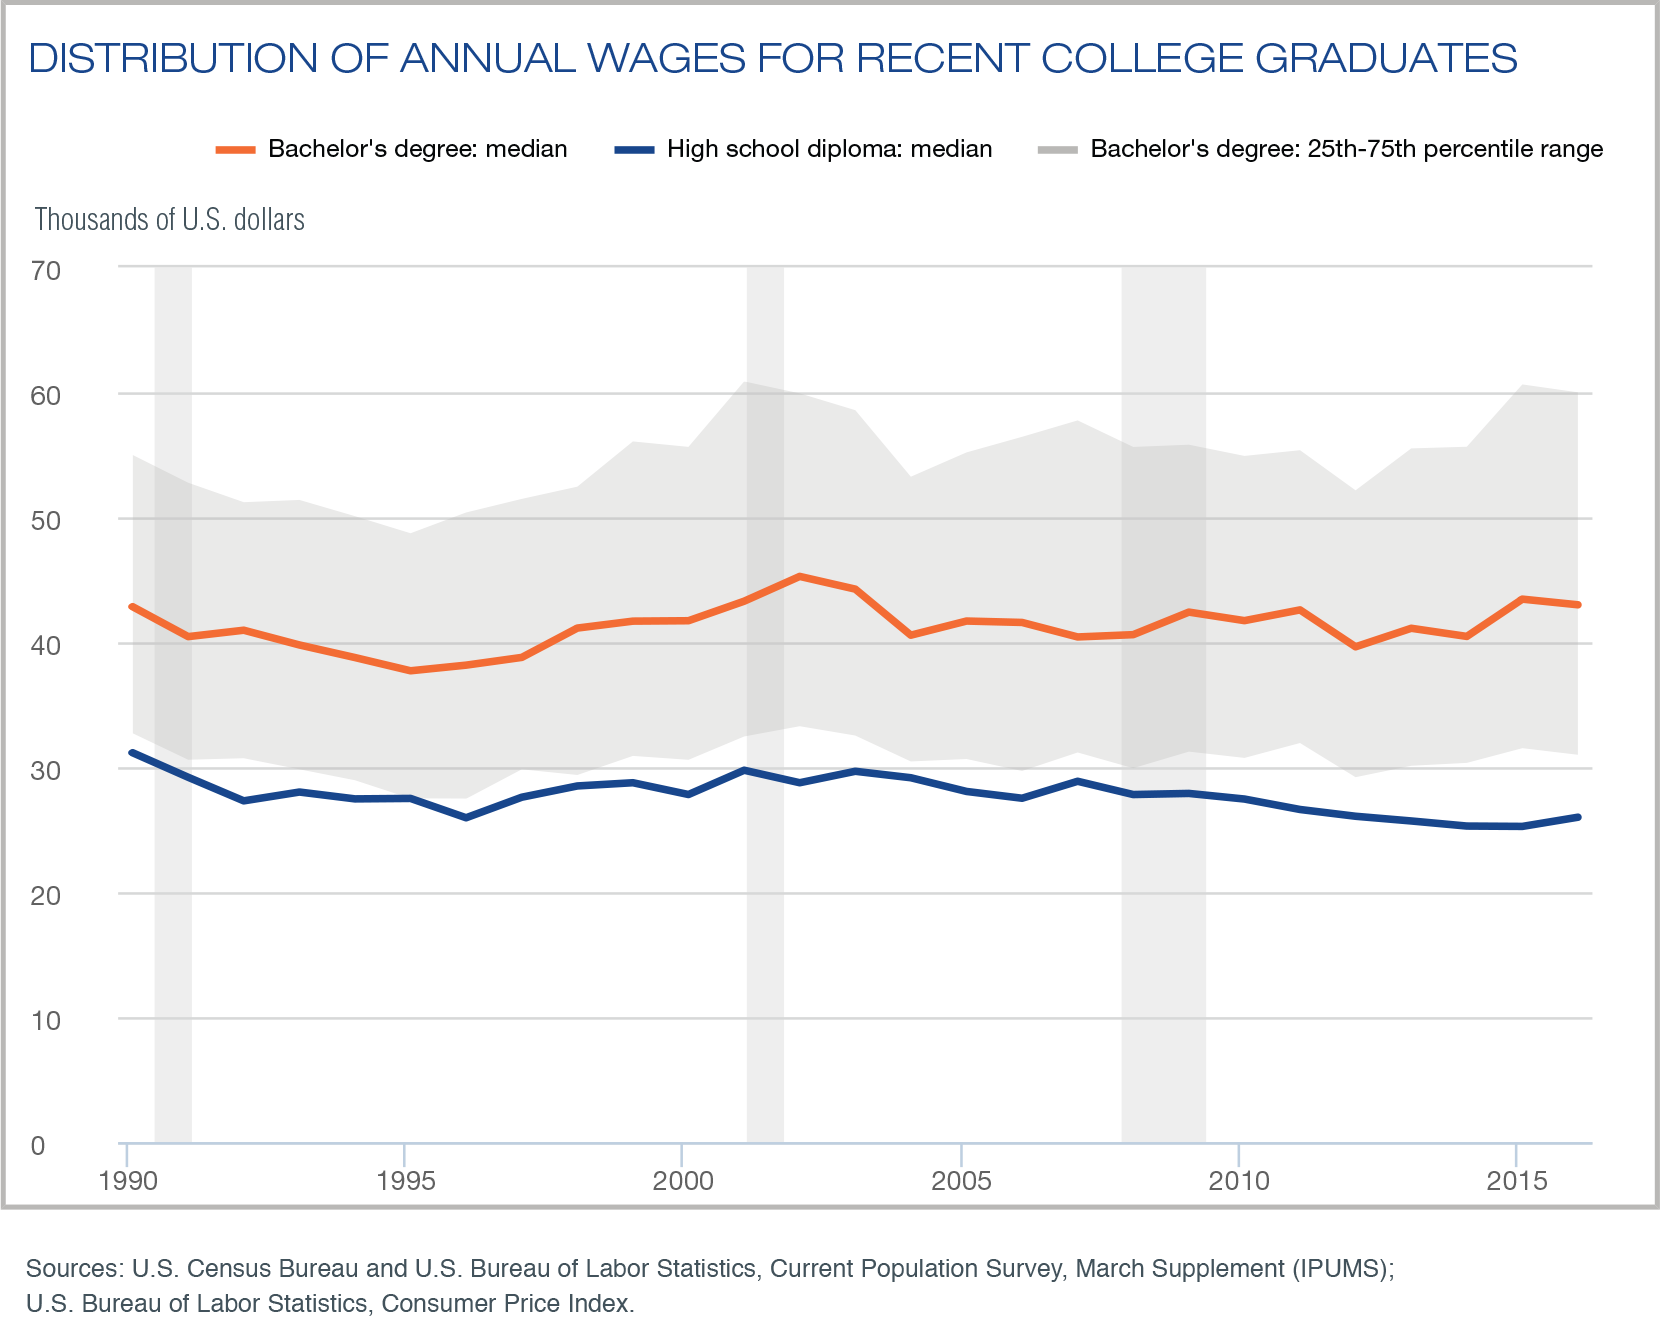 AnnualWages_RecentGrads---FRB-NY